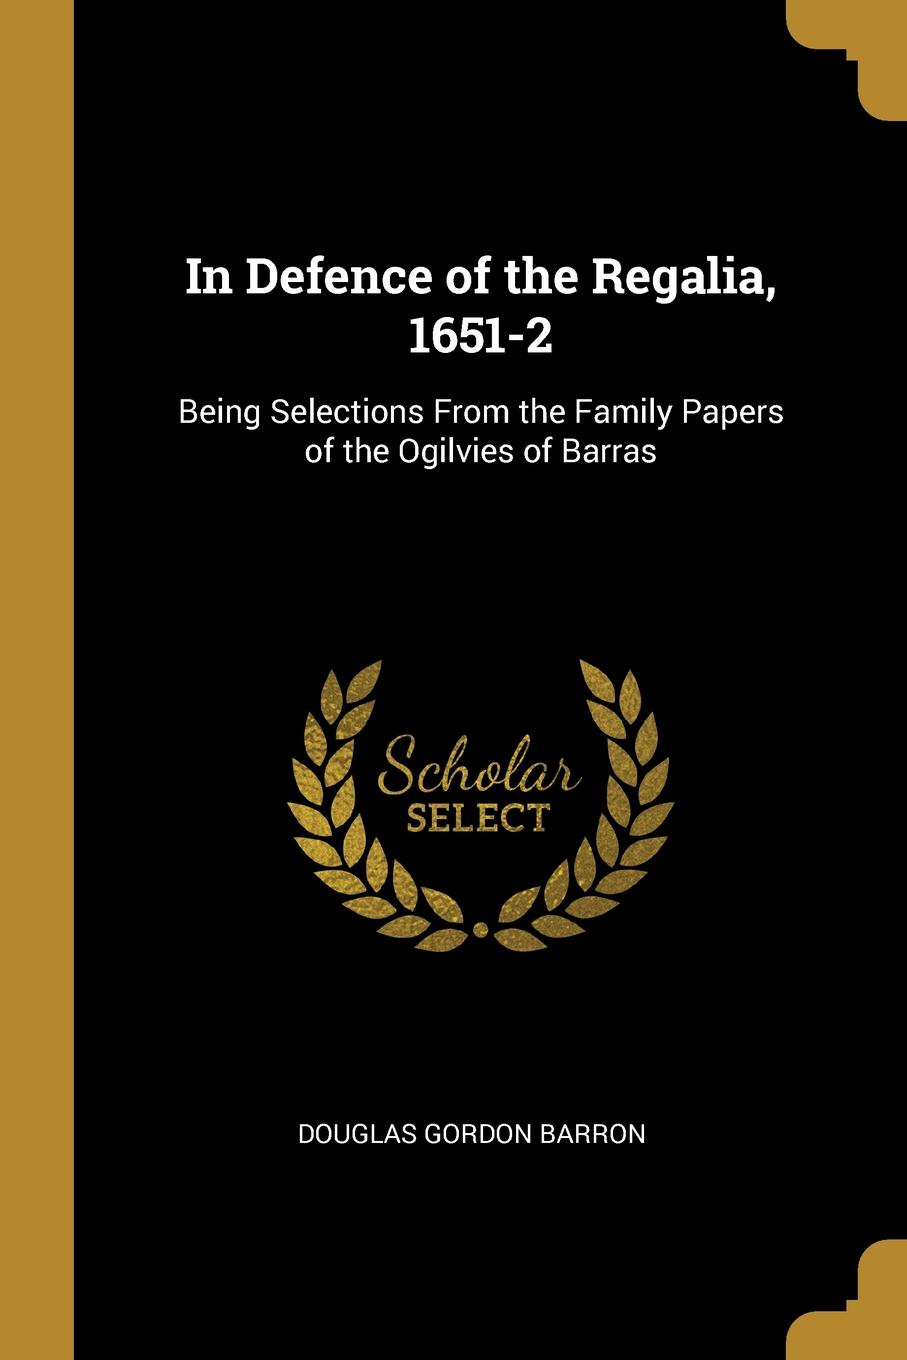 In Defence of the Regalia, 1651-2. Being Selections From the Family Papers of the Ogilvies of Barras